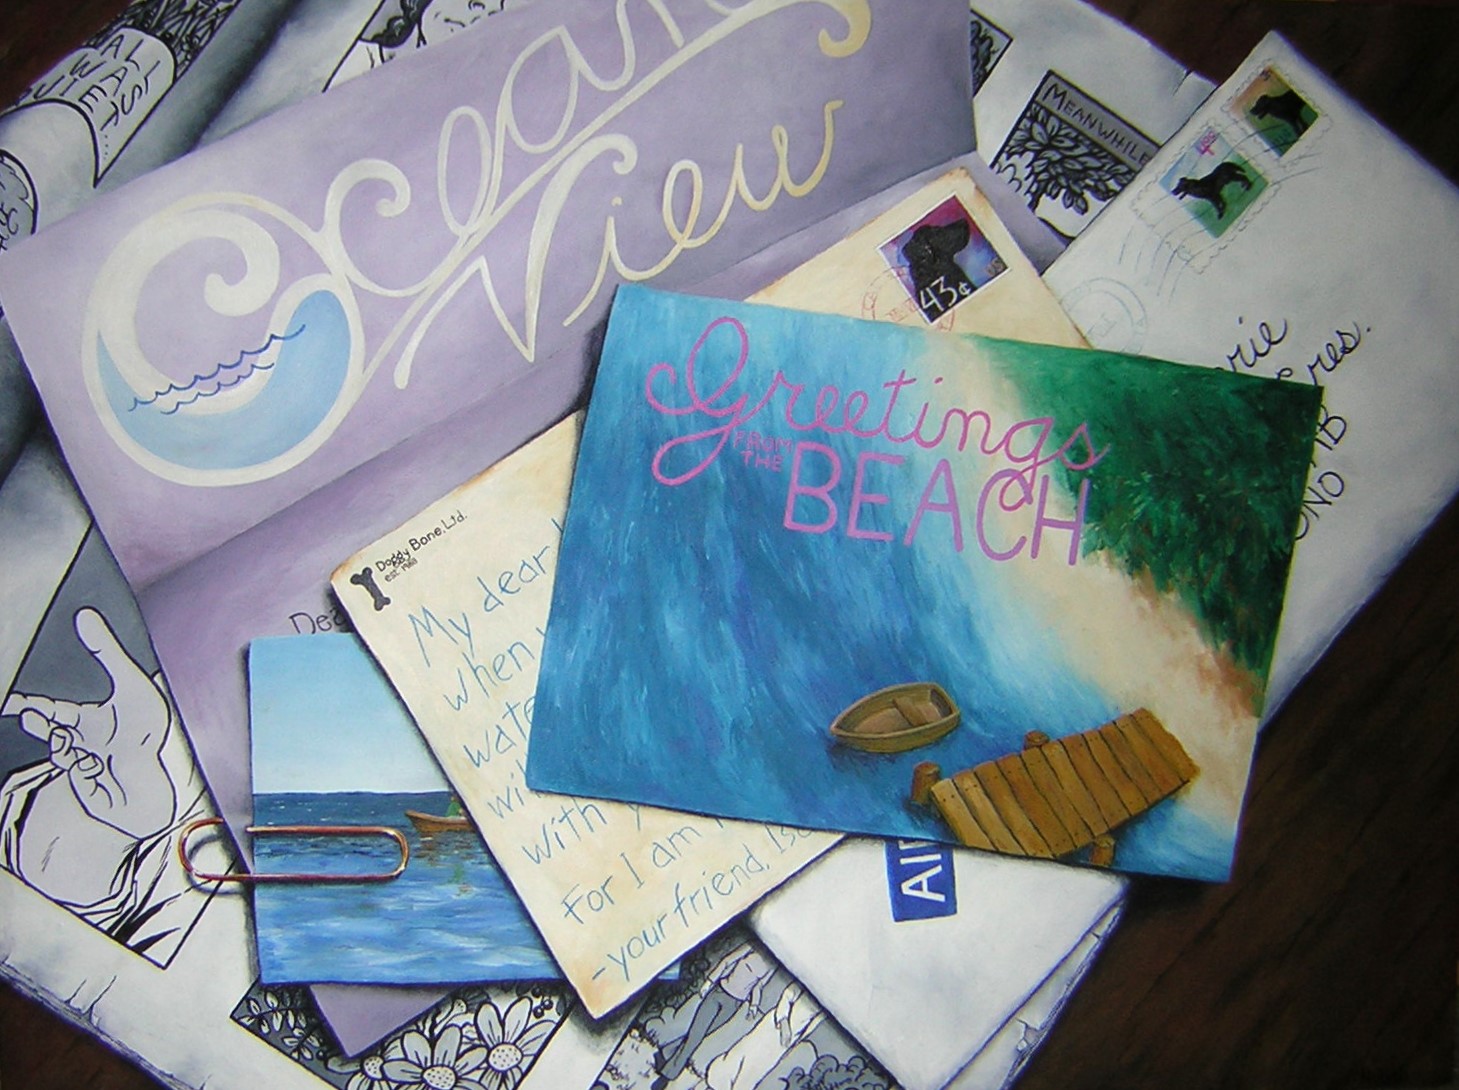 A painting showing assorted post cards and letters and photographs strewn on a desk top.